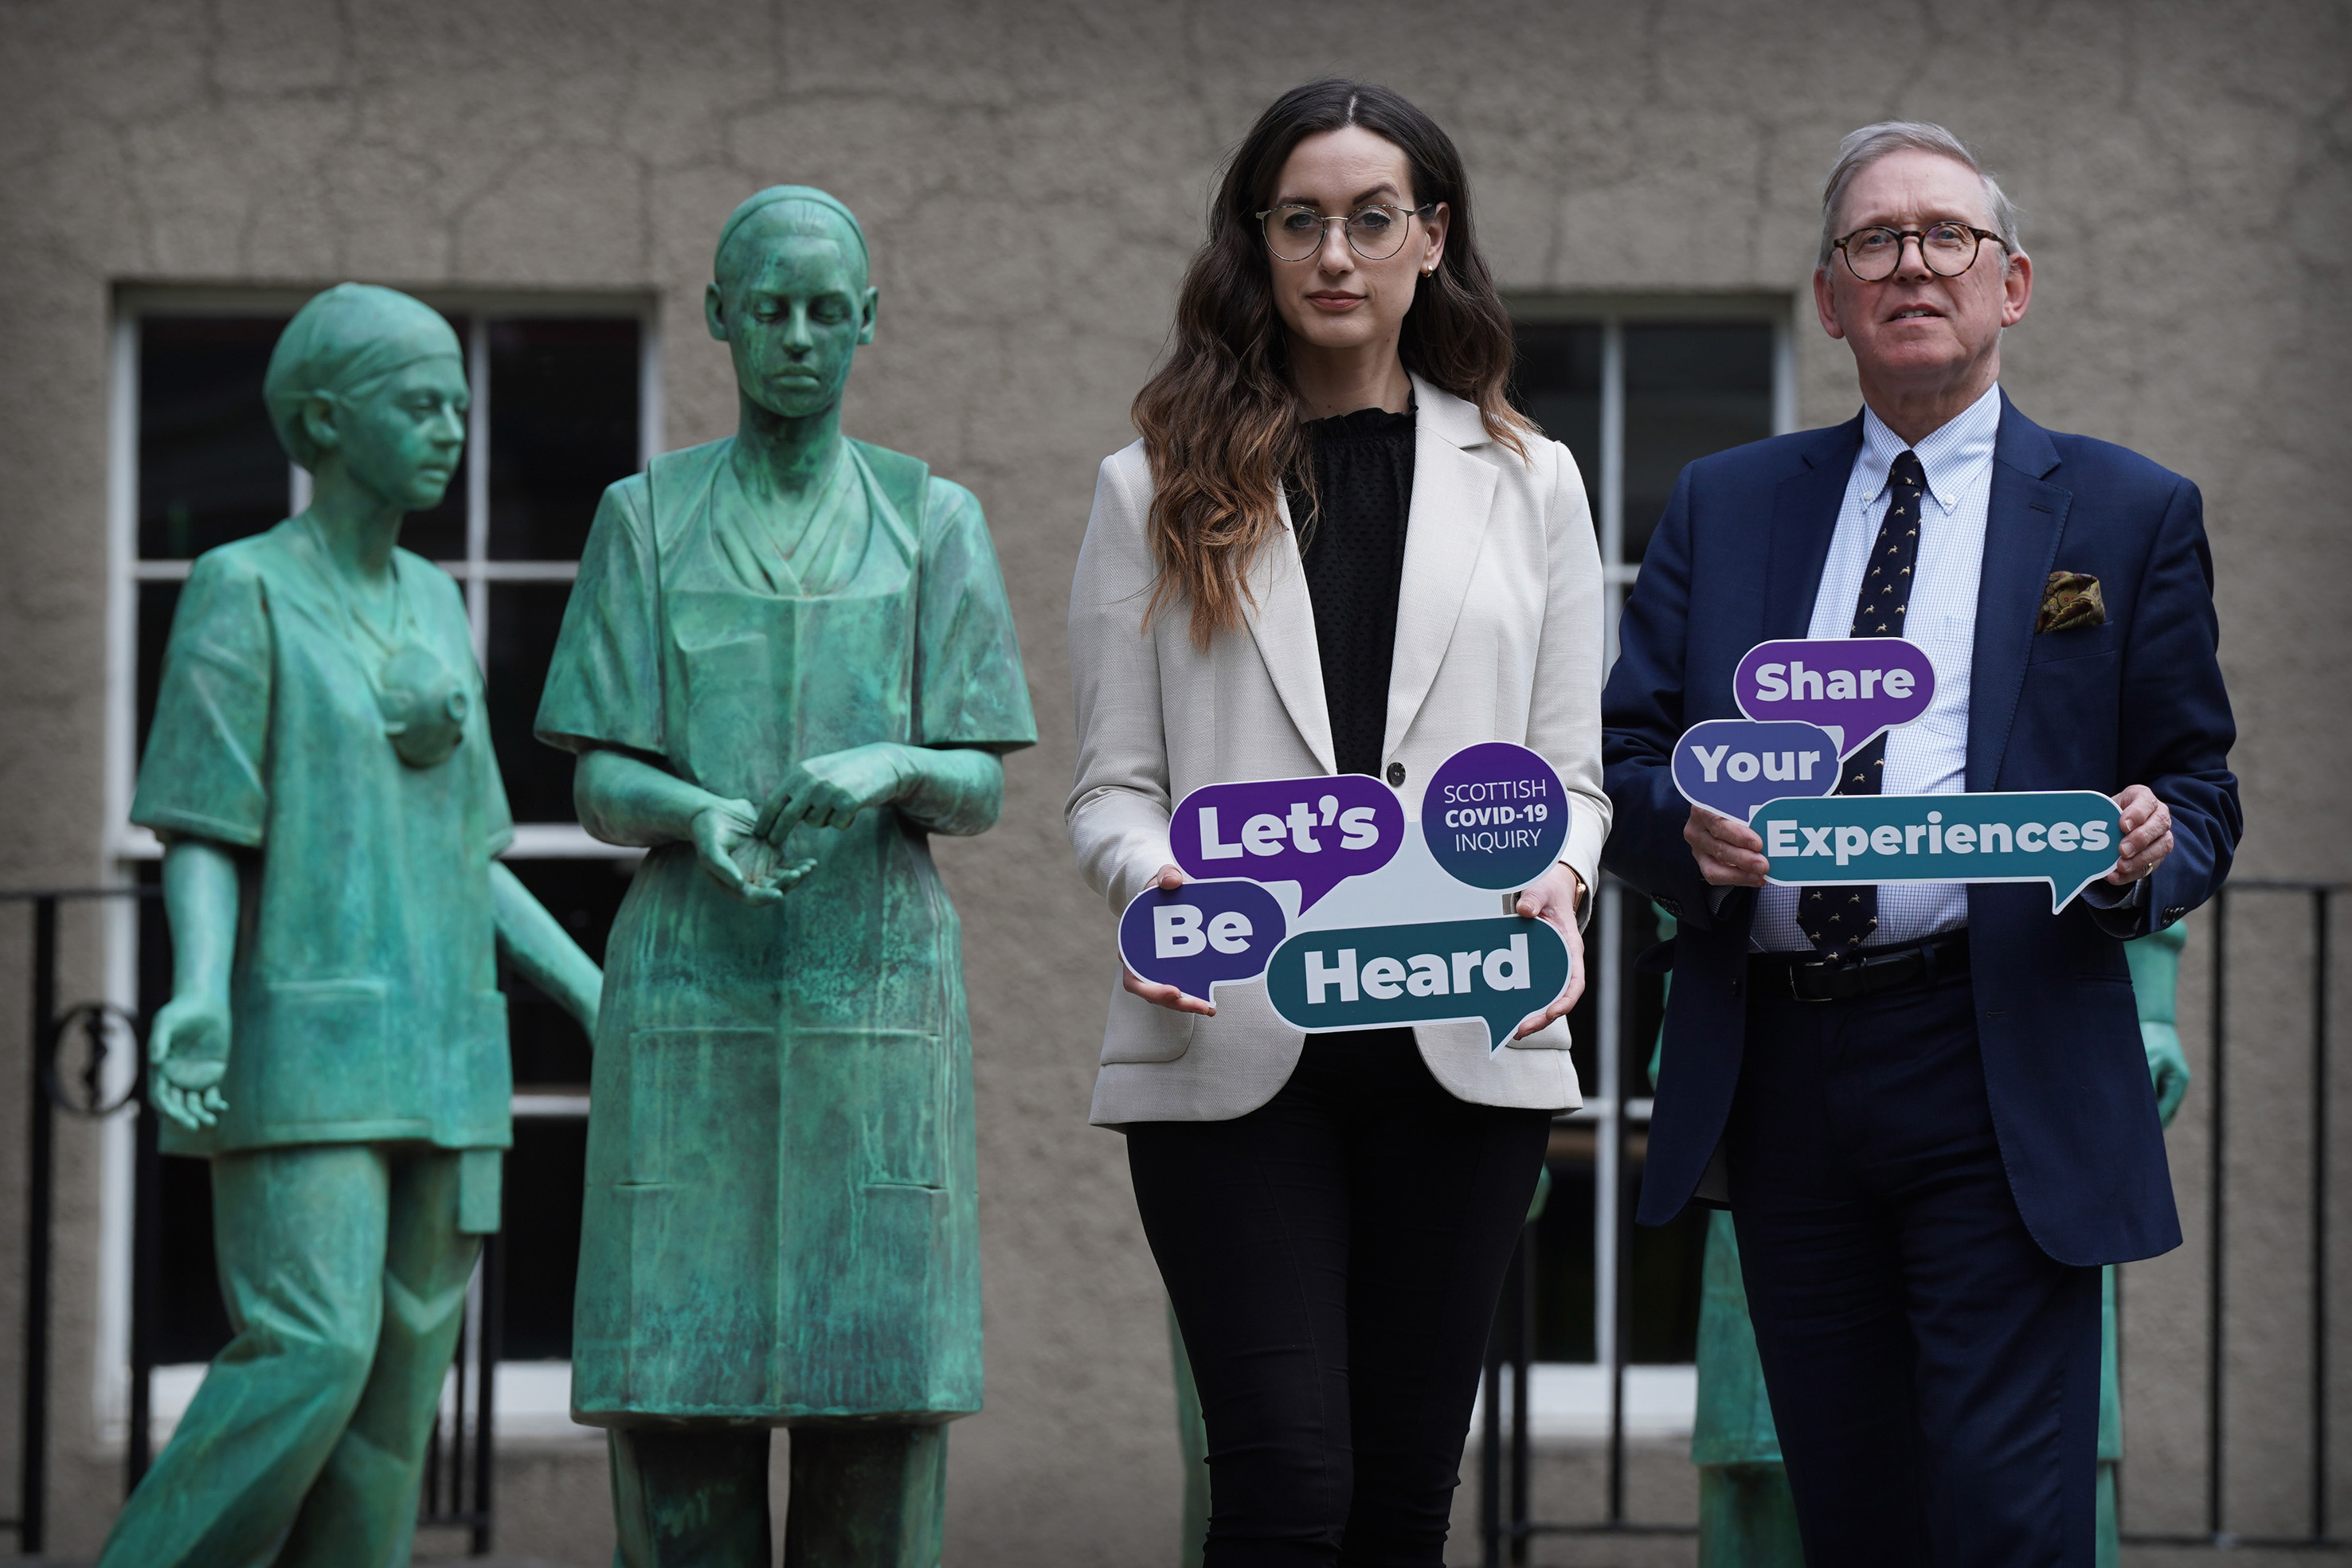 Lord Brailsford, Chair to the Scottish COVID-19 Inquiry, and Alexandra Anderson, Head of Let's Be Heard.